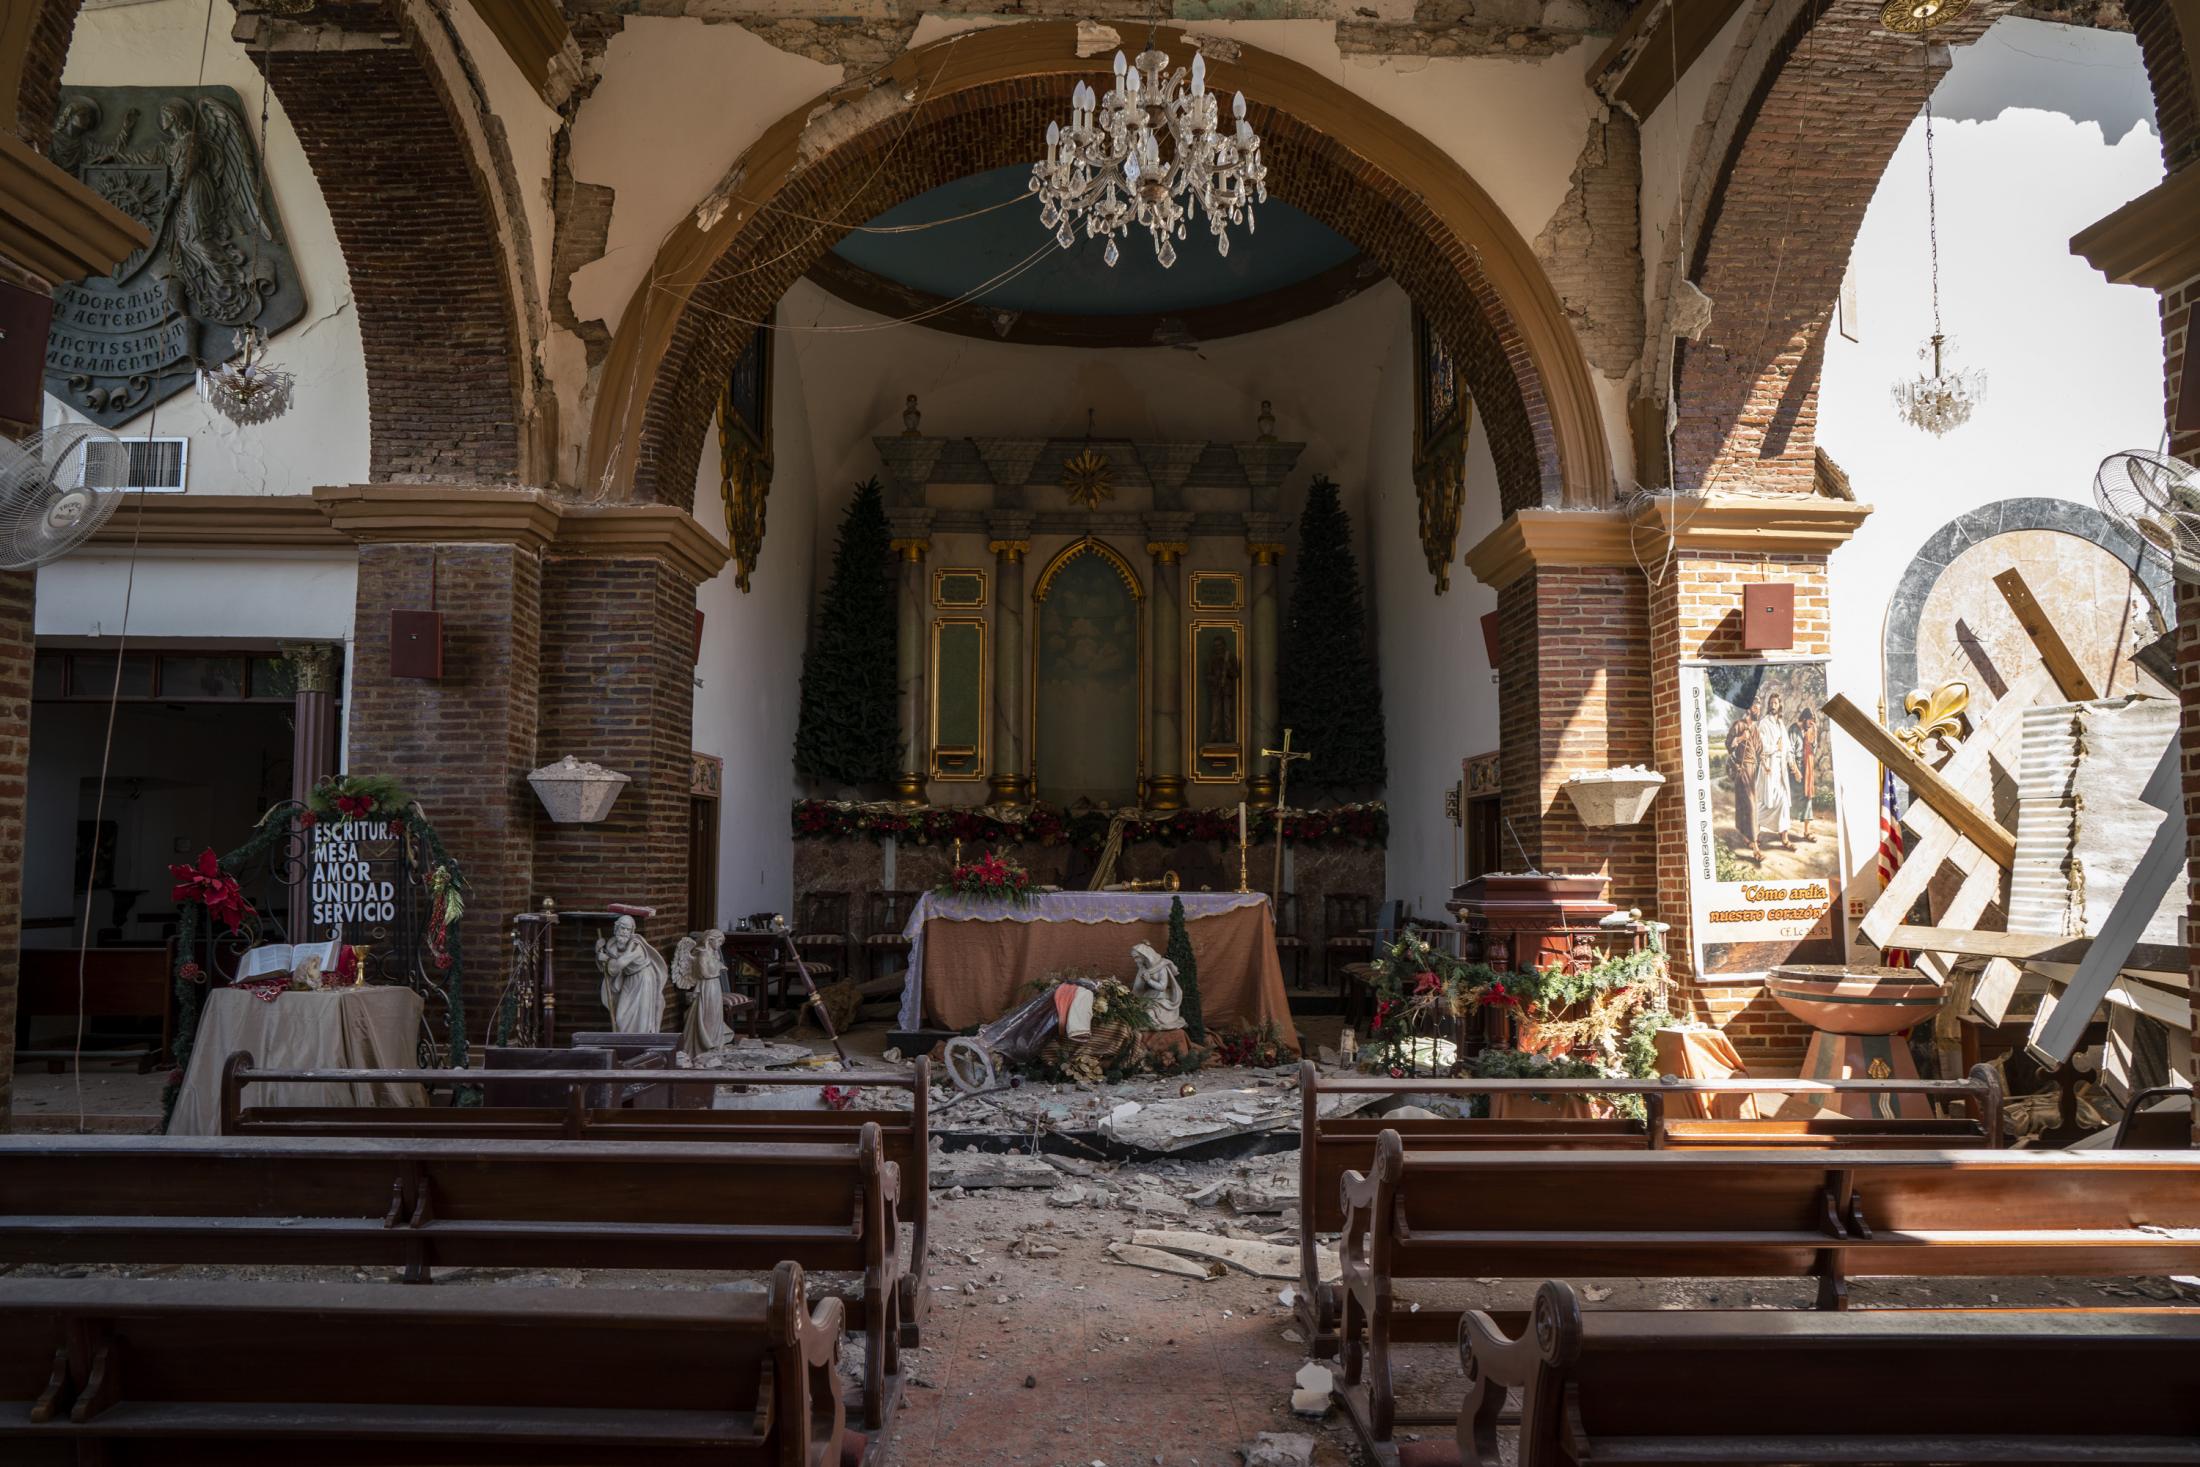 GUAYANILLA, PUERTO RICO - JANUARY 7: The father inspect damage to the church Parroquia Inmaculada Concepci&oacute;n after a 6.4 earthquake hit...